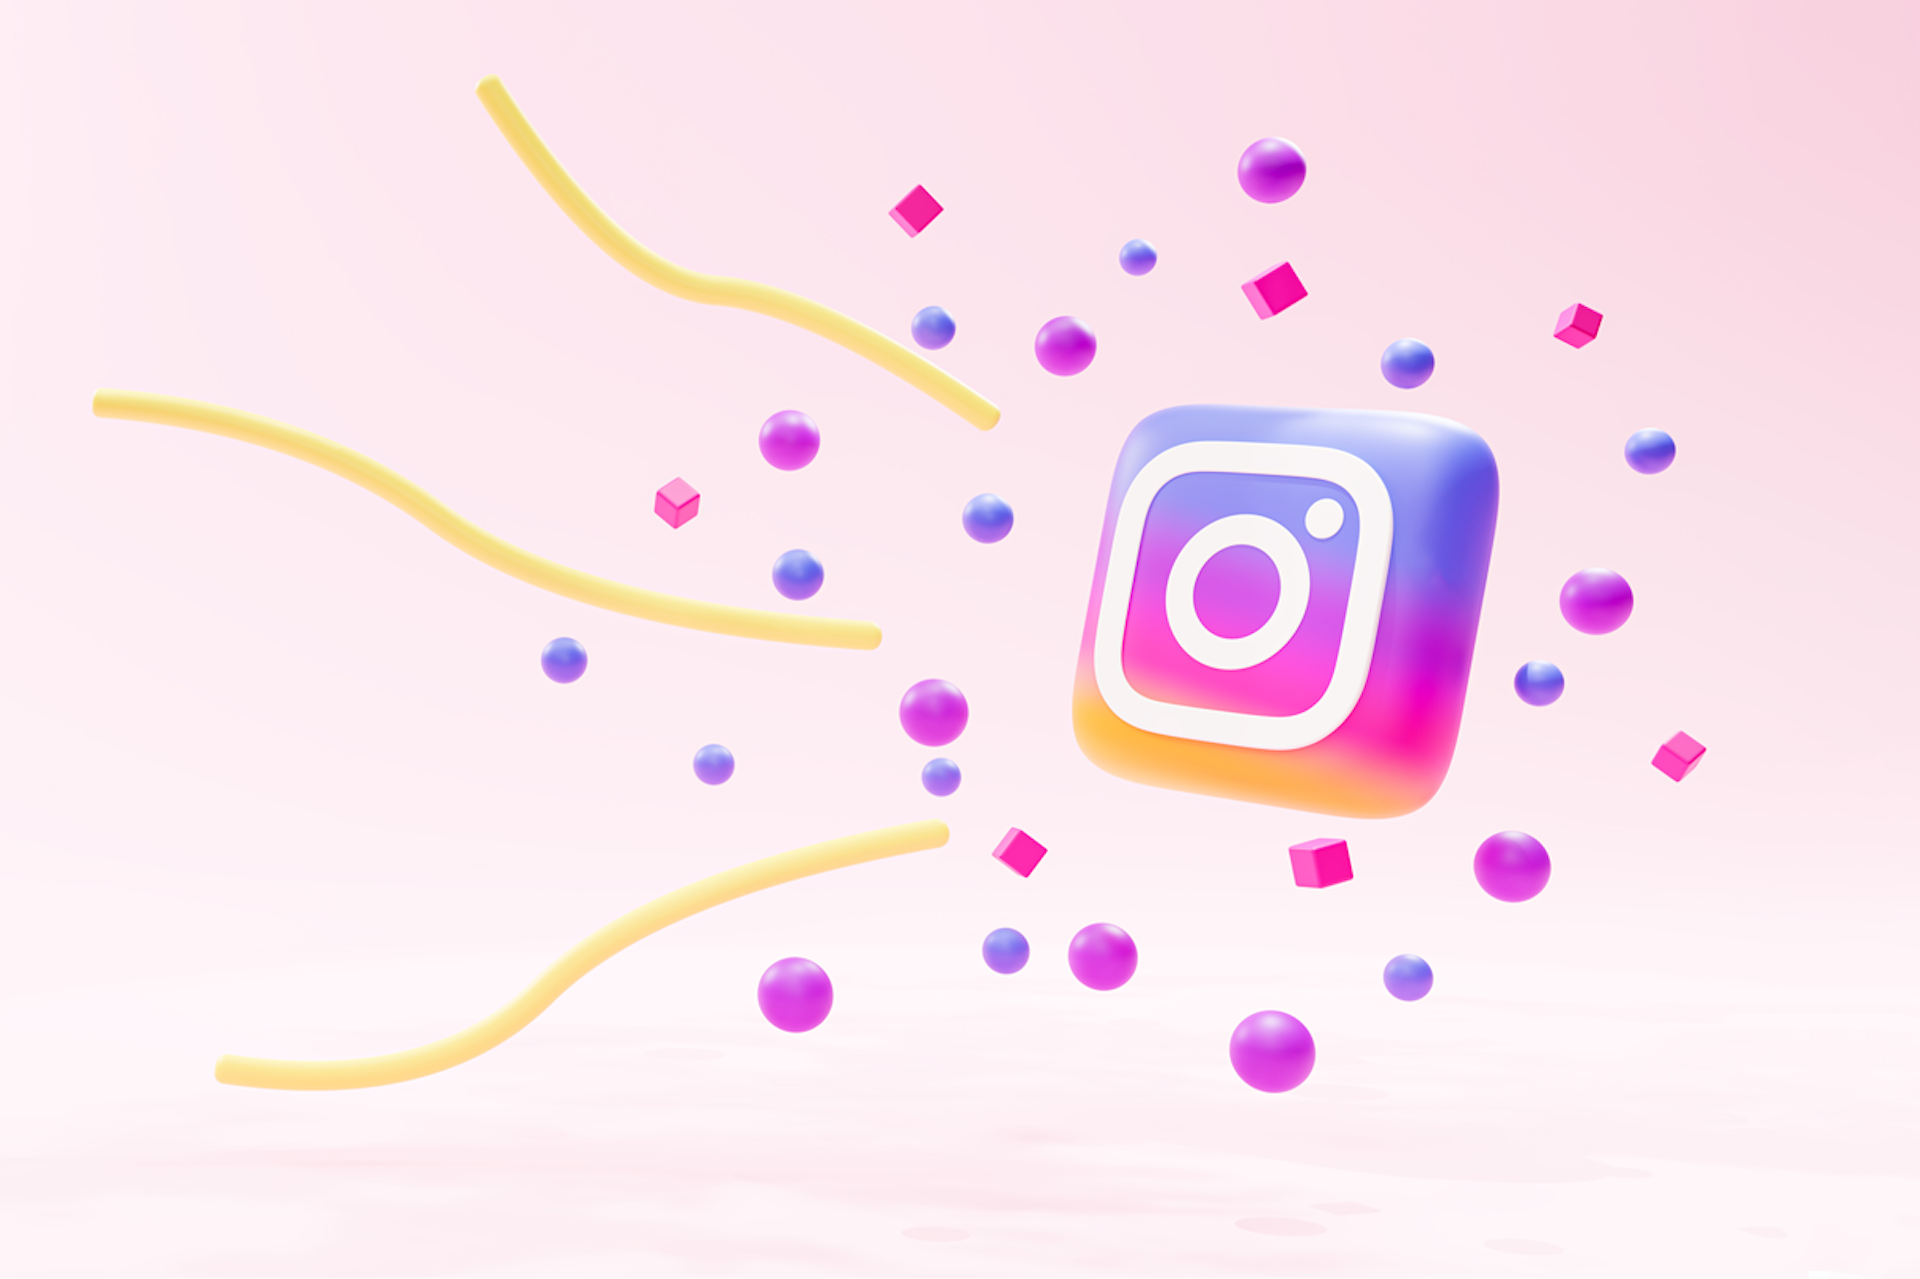 Instagram trends blog post. Image showing Instagram logo on pale pink background surrounded by multi-colored dots and yellow squiggly lines